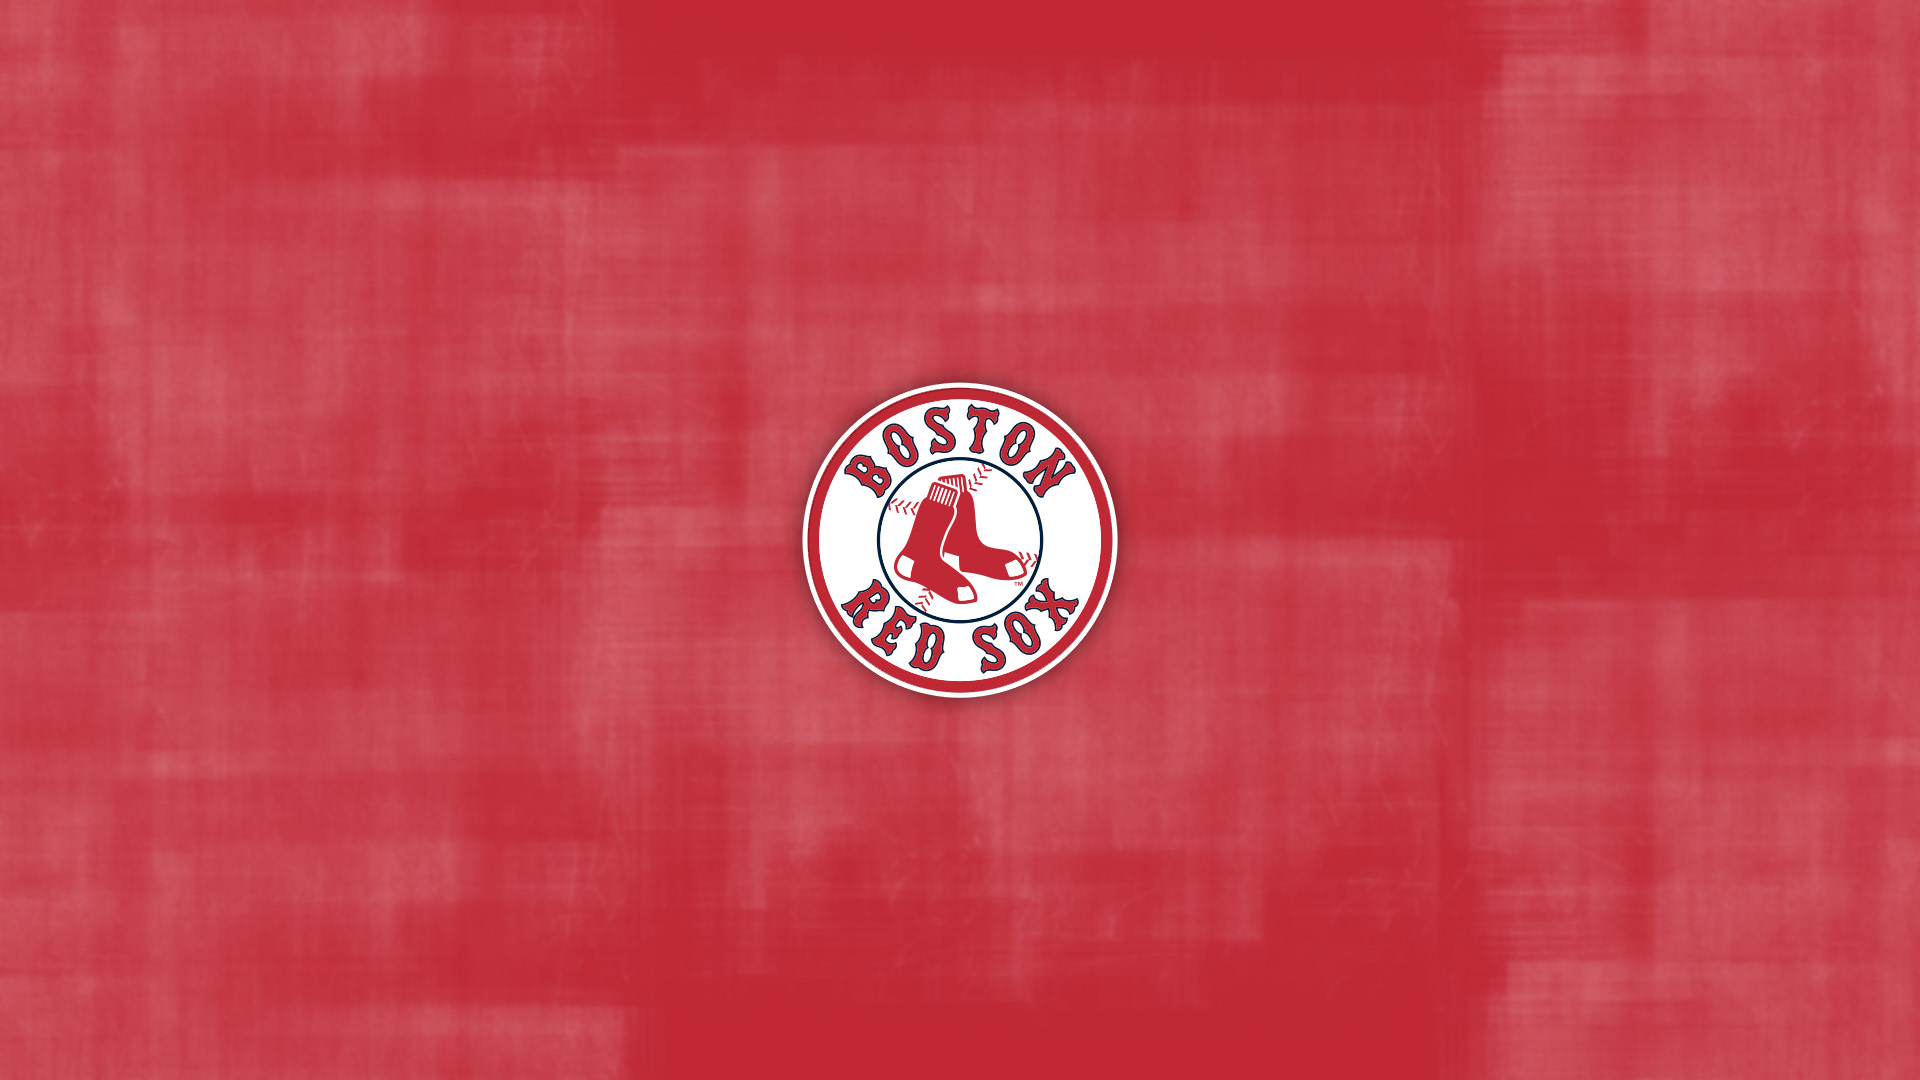 Boston Red Sox HD Wallpaper 1080p Is A Fantastic For Your